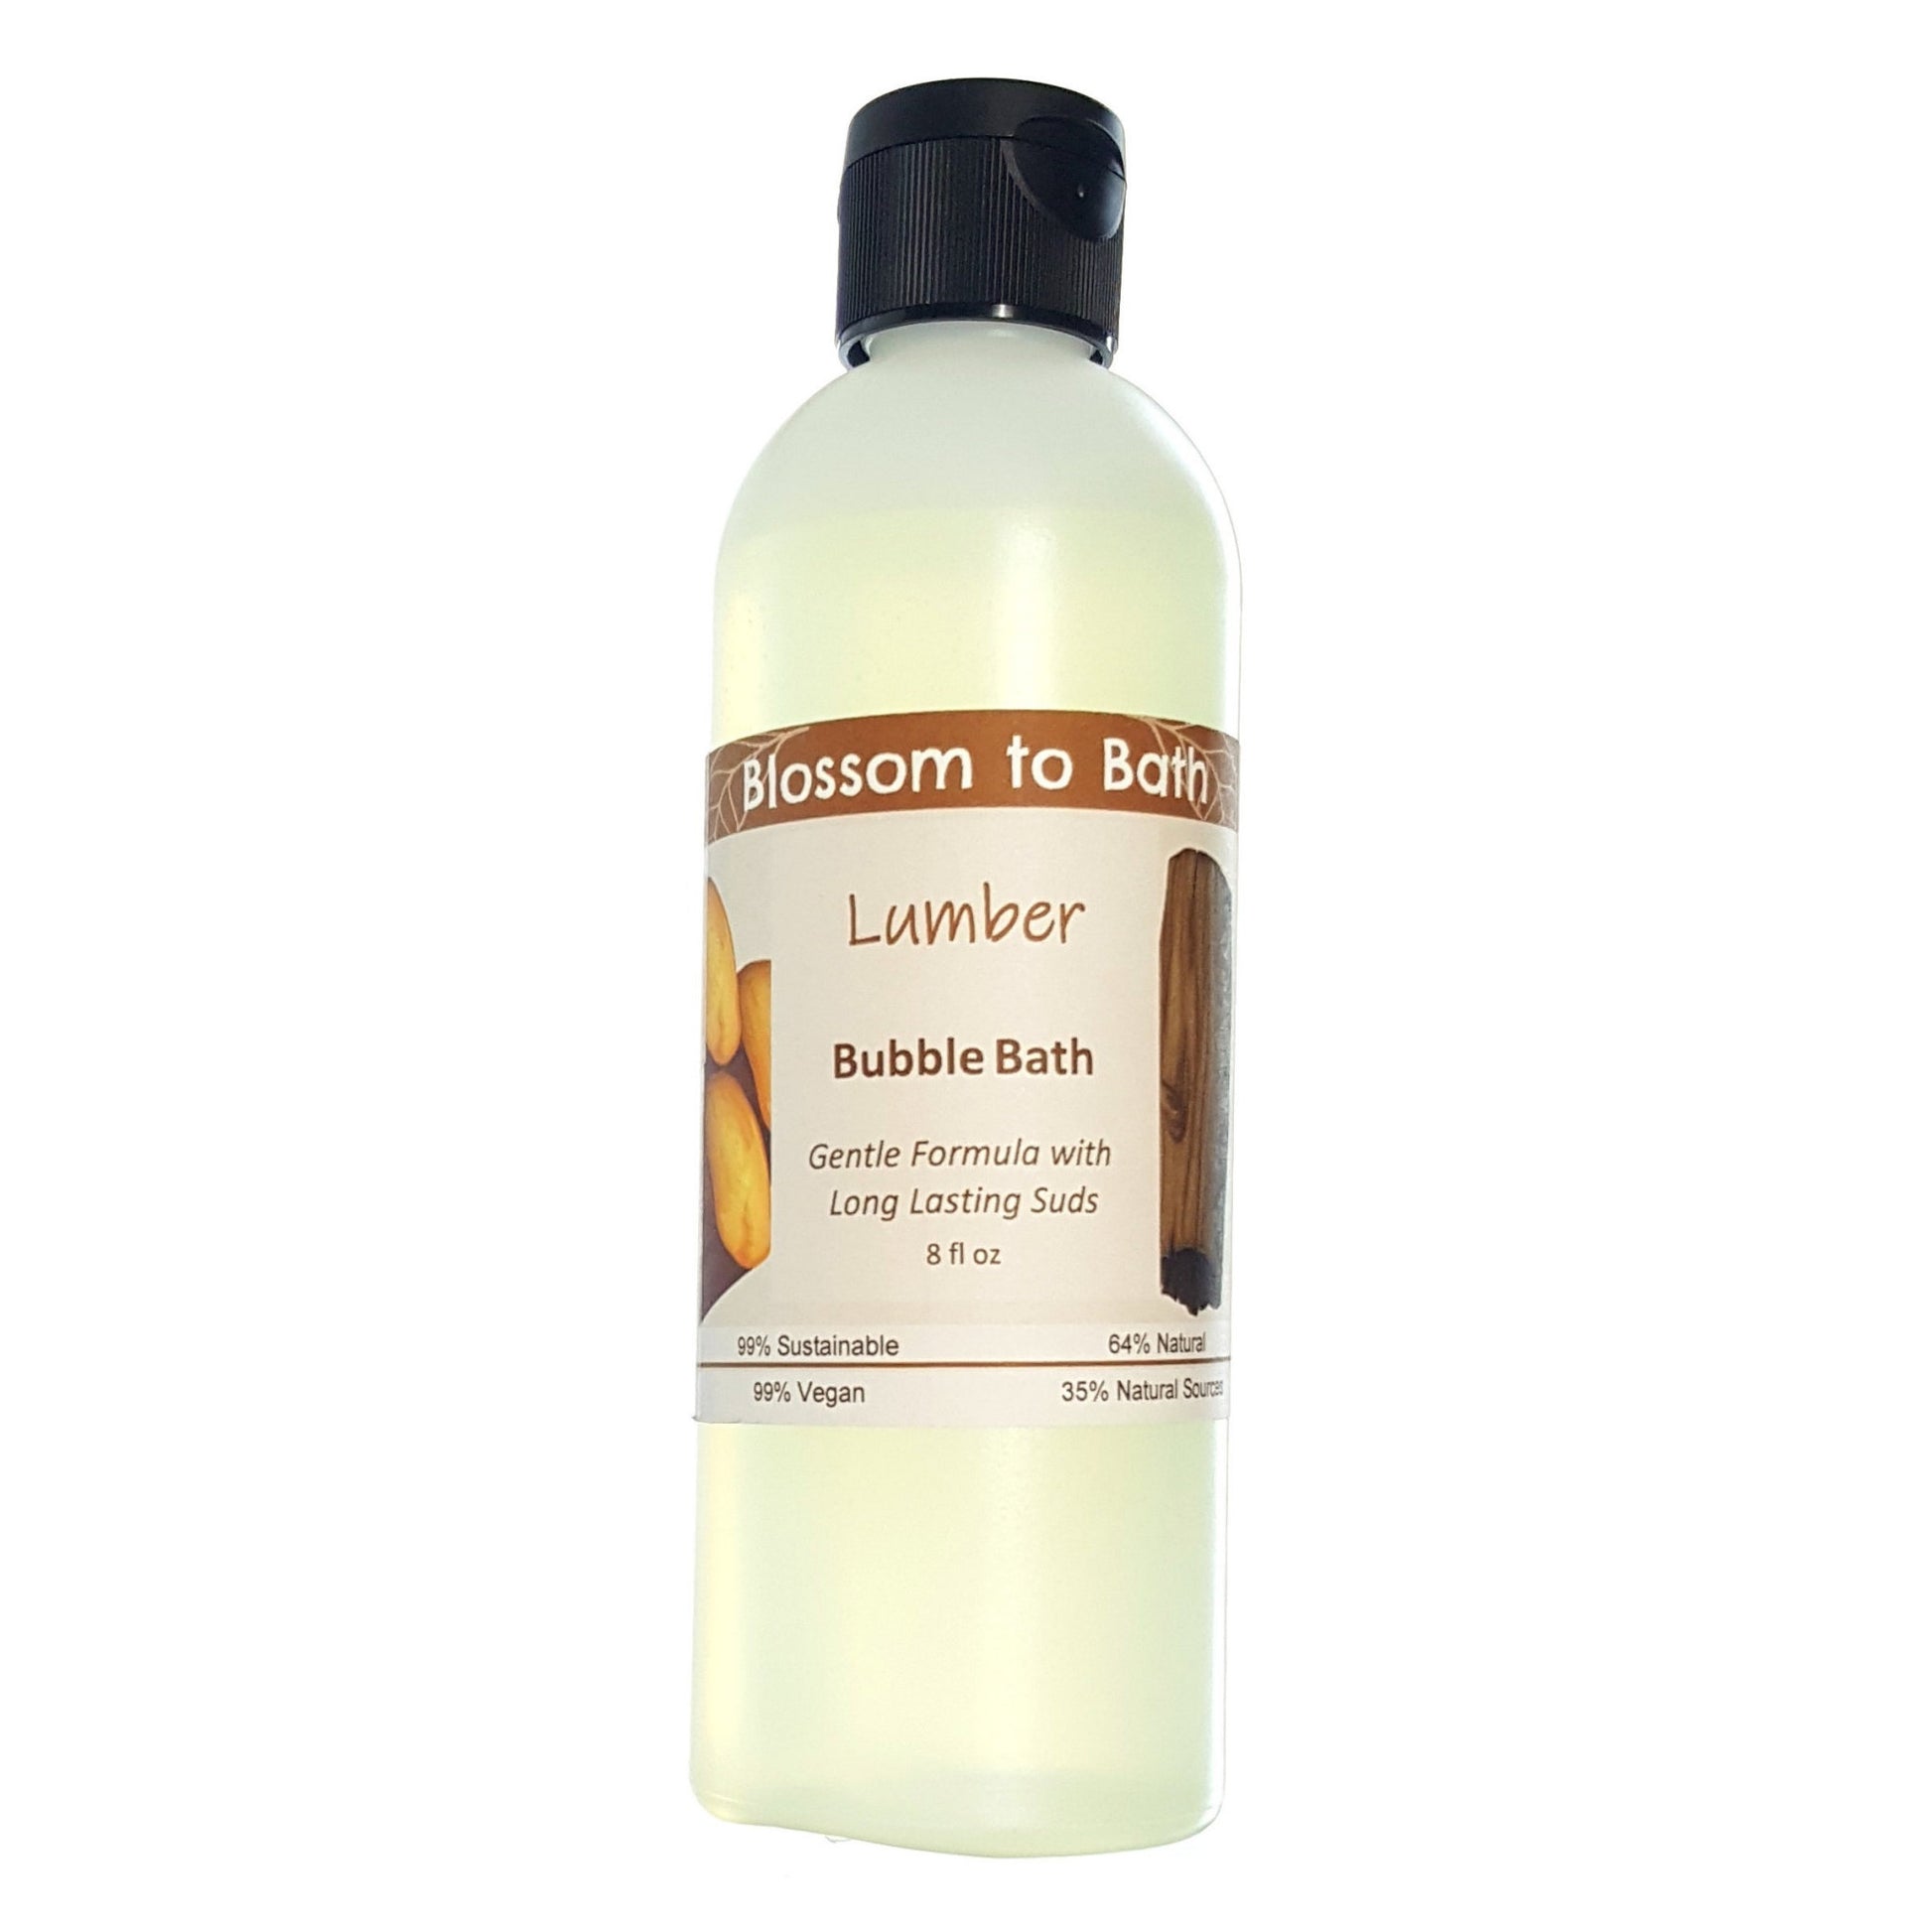 Buy Blossom to Bath Lumber Bubble Bath from Flowersong Soap Studio.  Lively, long lasting  bubbles in a gentle plant based formula for maximum relaxation time  A masculine fragrance that echoes fresh cut trees.